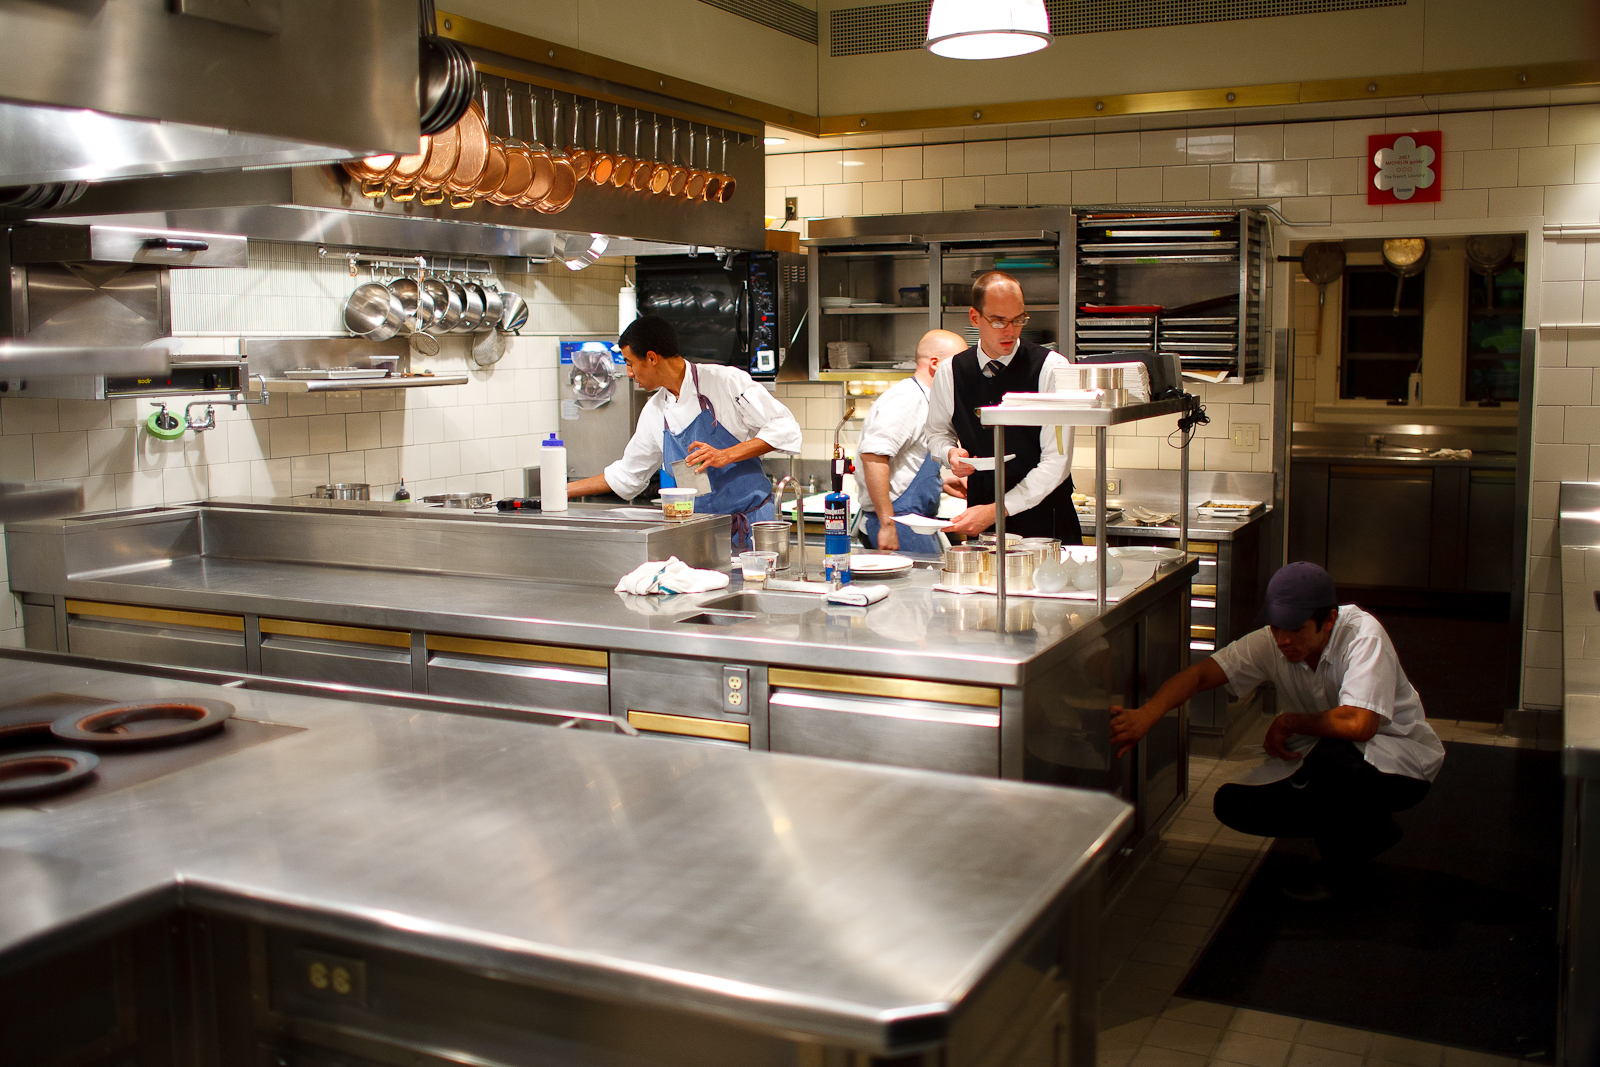 Inside the kitchen of The French Laundry, after hours